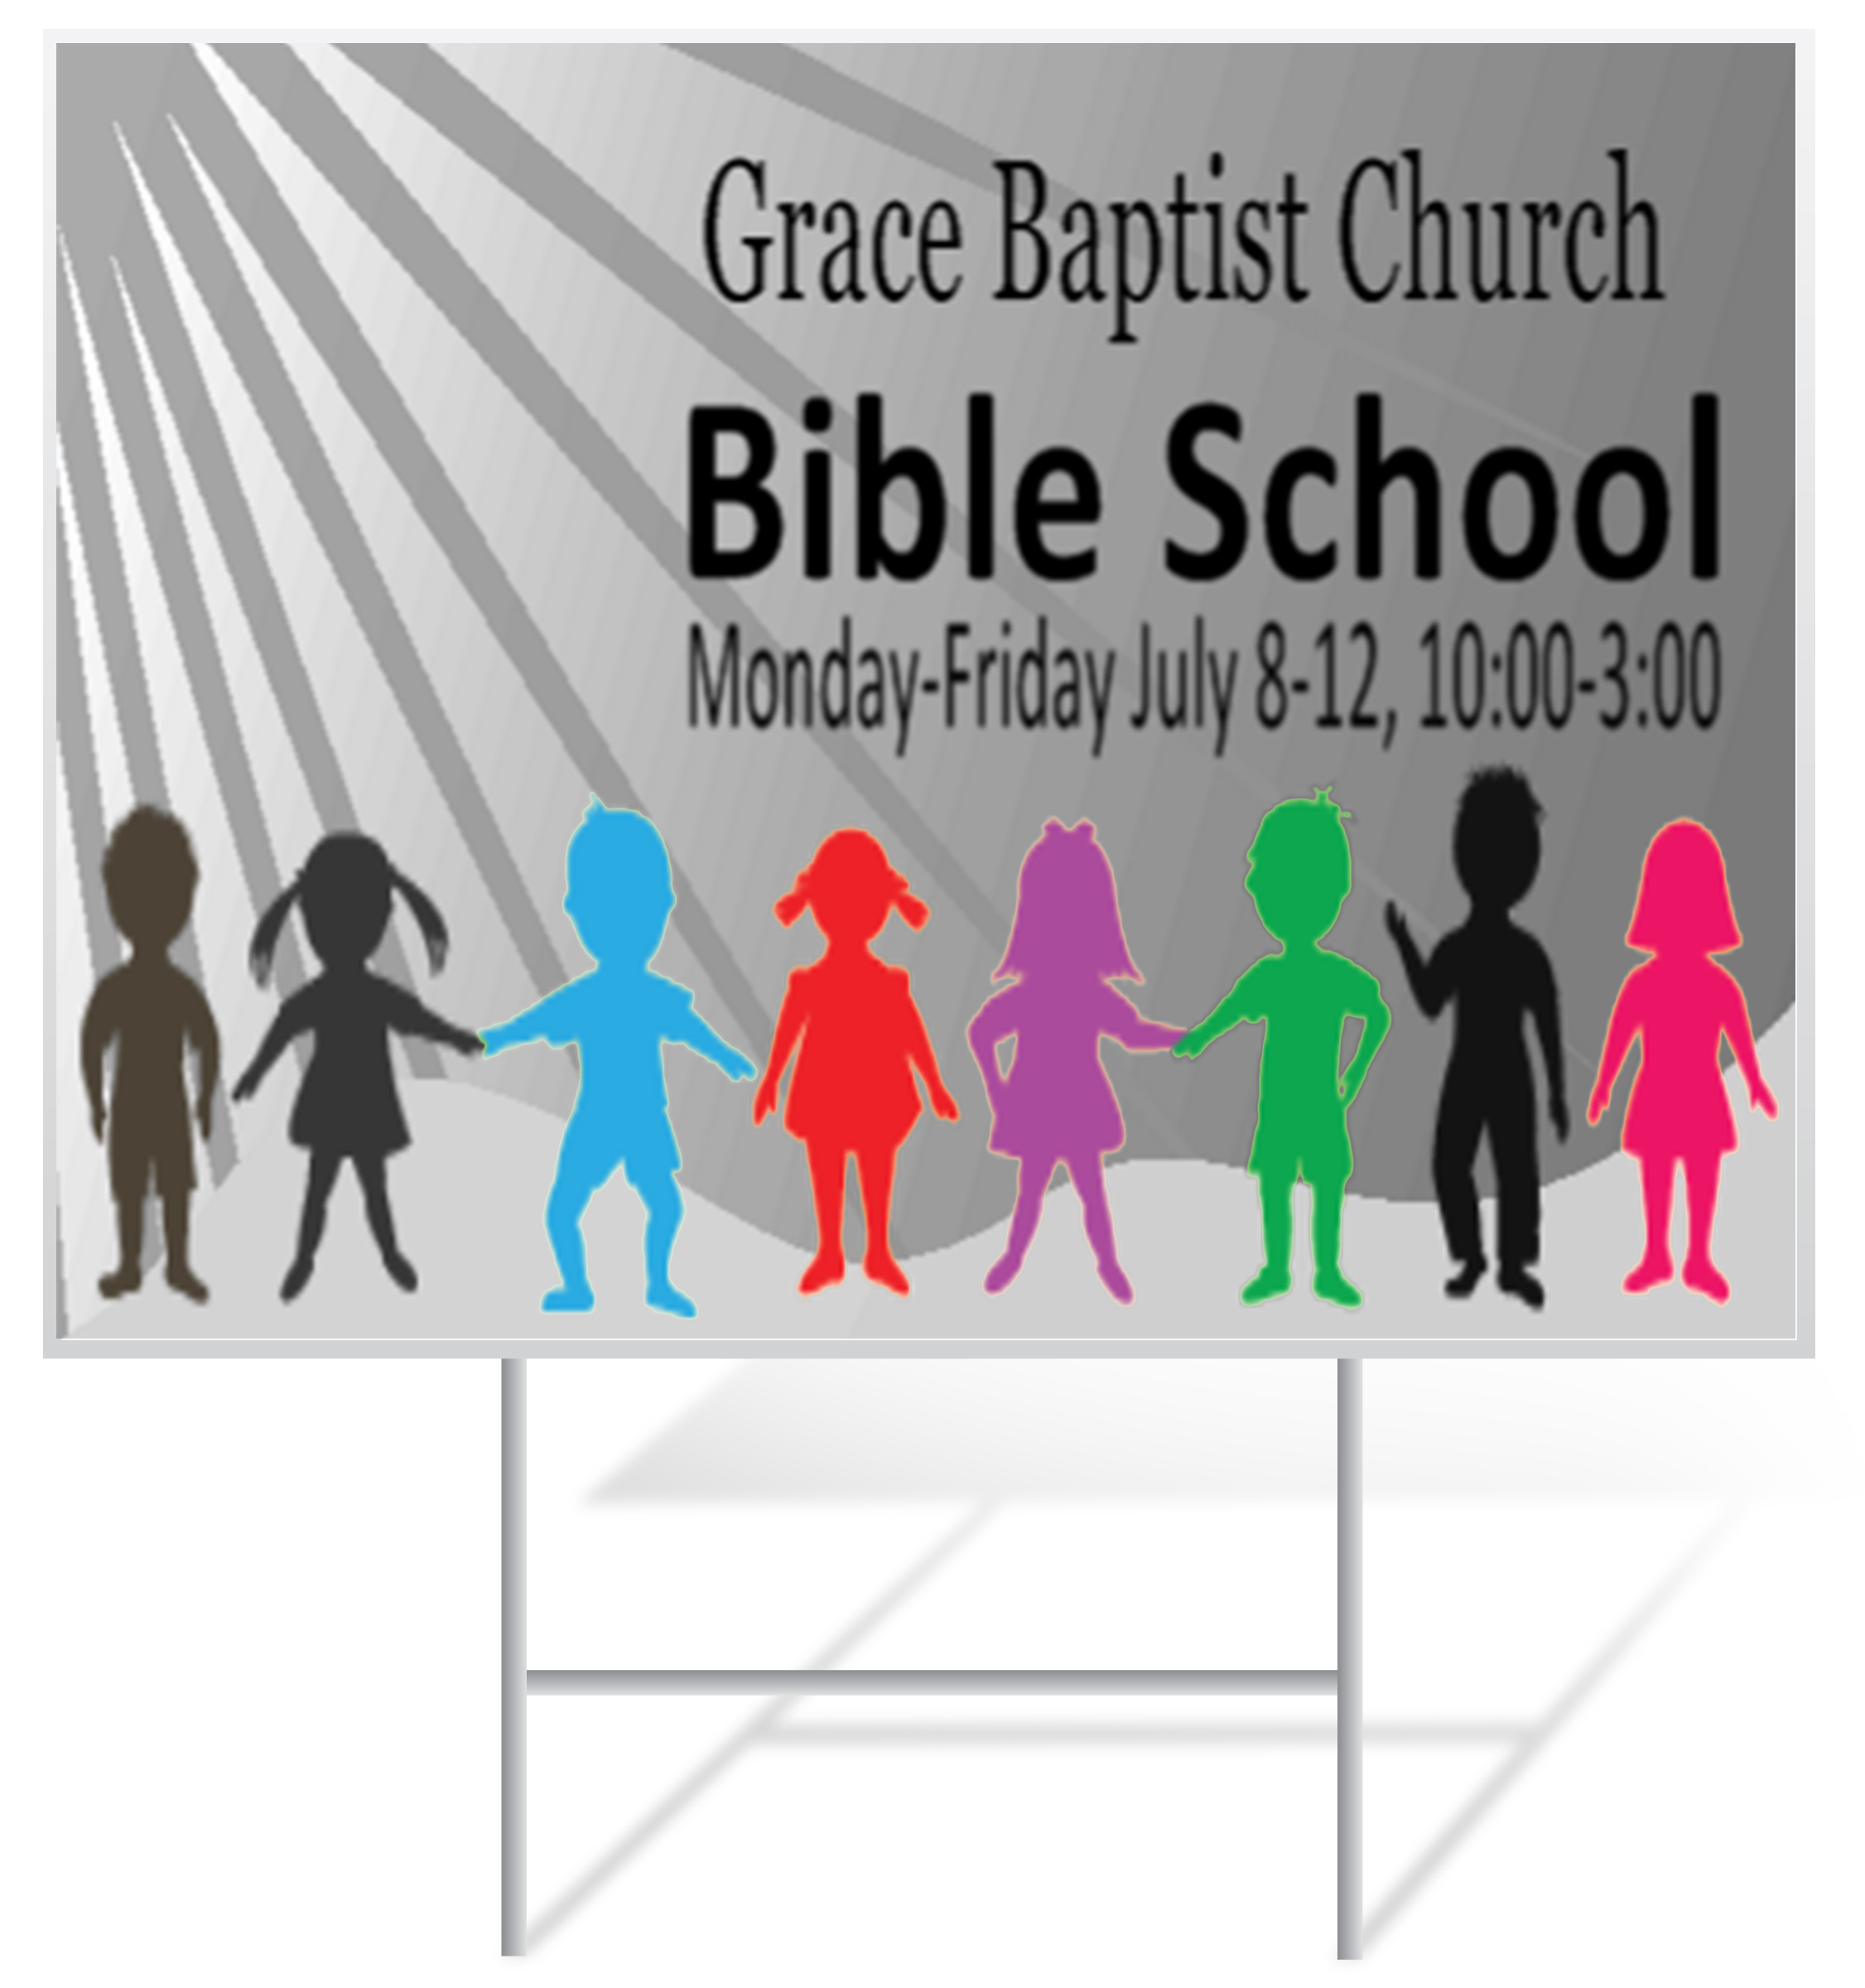 Vacation Bible School Lawn Sign Example | LawnSigns.com